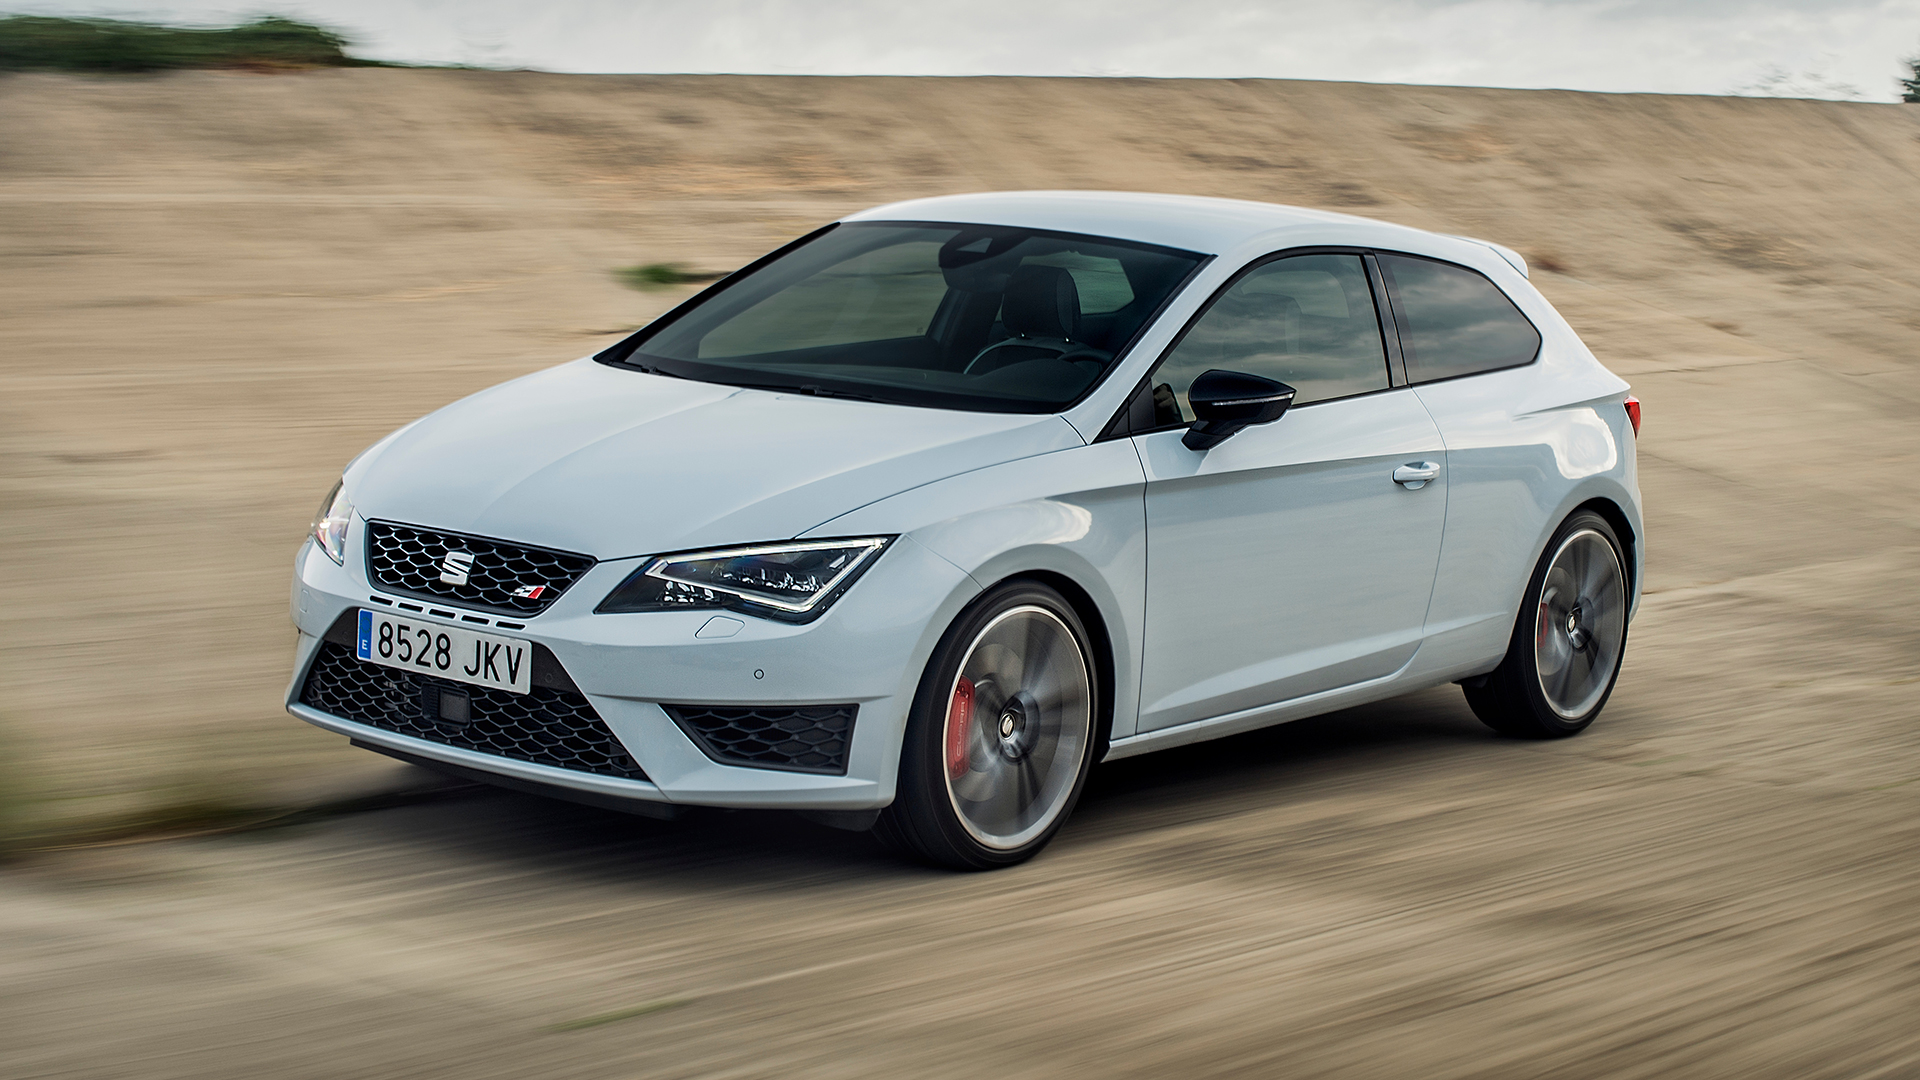 Seat Leon Cupra 290 SC first drive review | Auto Trader UK